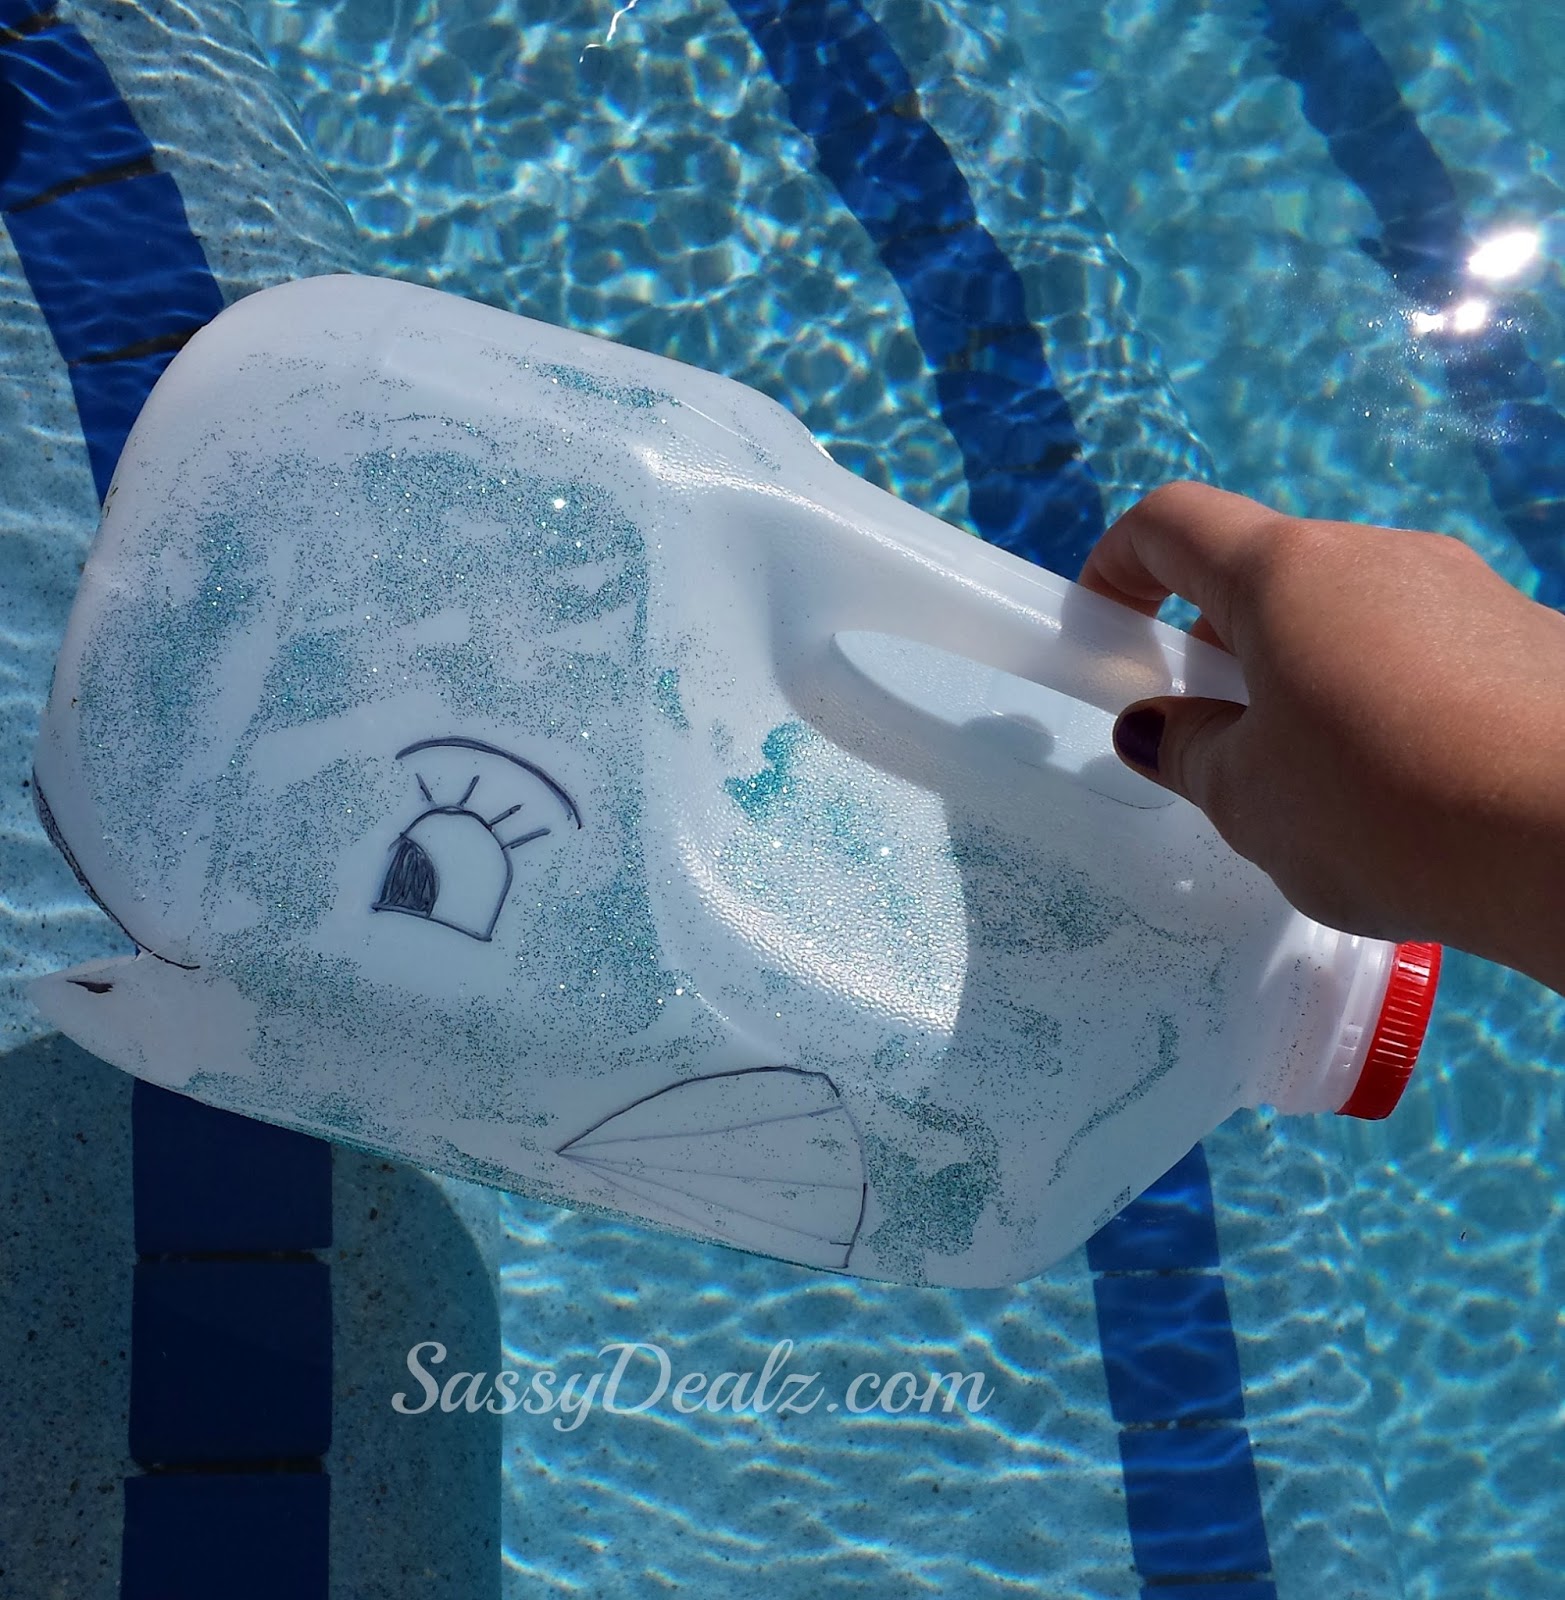 DIY: Whale Milk Jug Kid's Craft (Great For Water Play!) - Crafty Morning